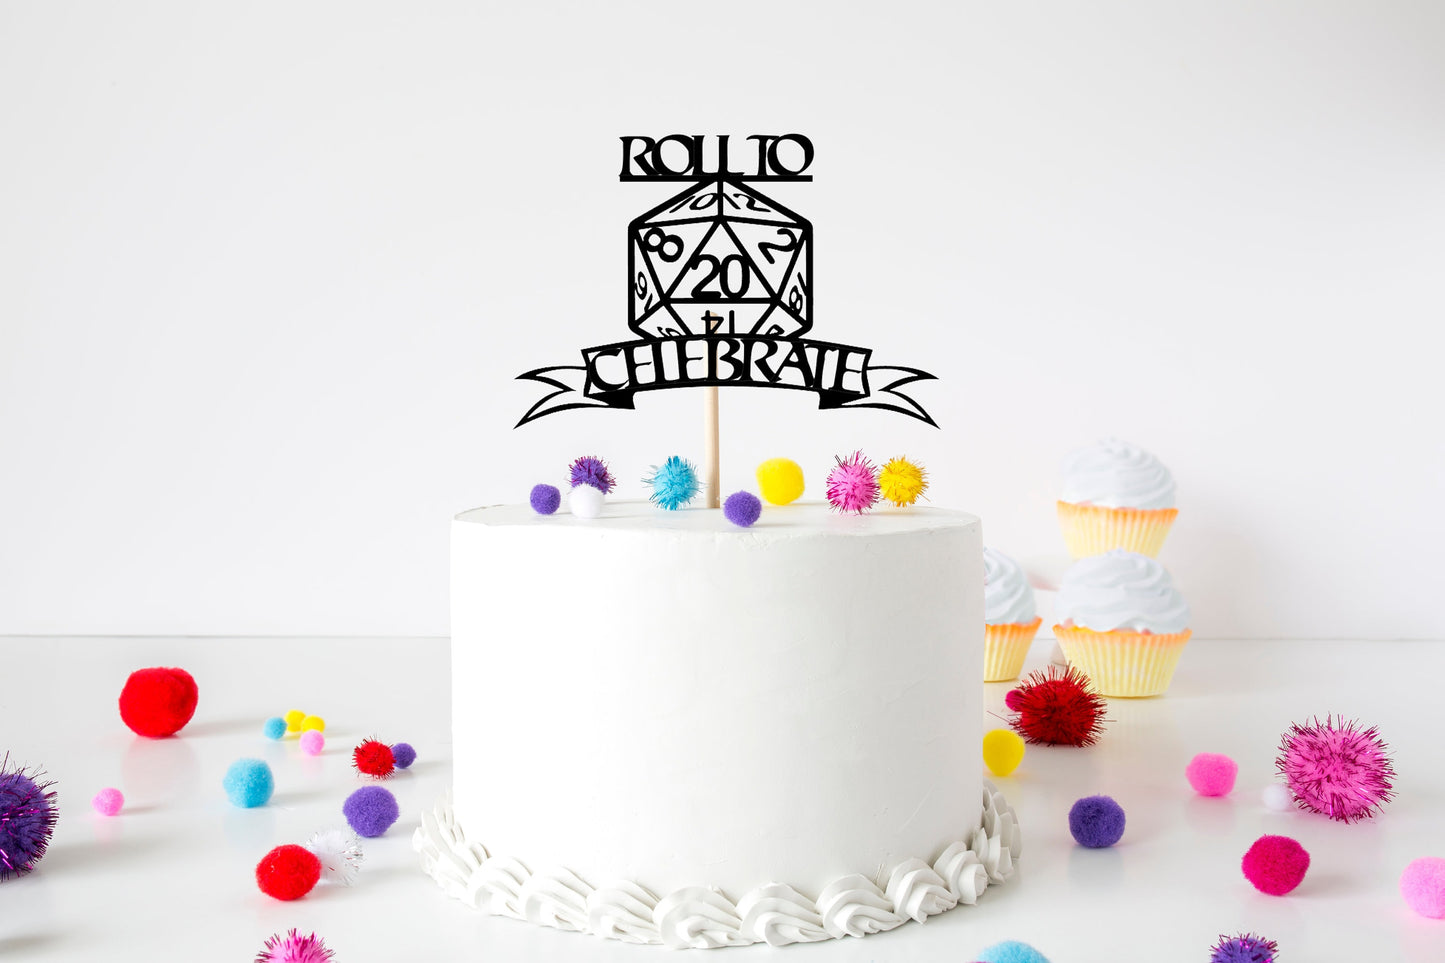 Roll To Celebrate D&D birthday cake topper digital download for Cricut or Silhouette, png, svg, jpeg, pdf cut files - Resplendent Aurora